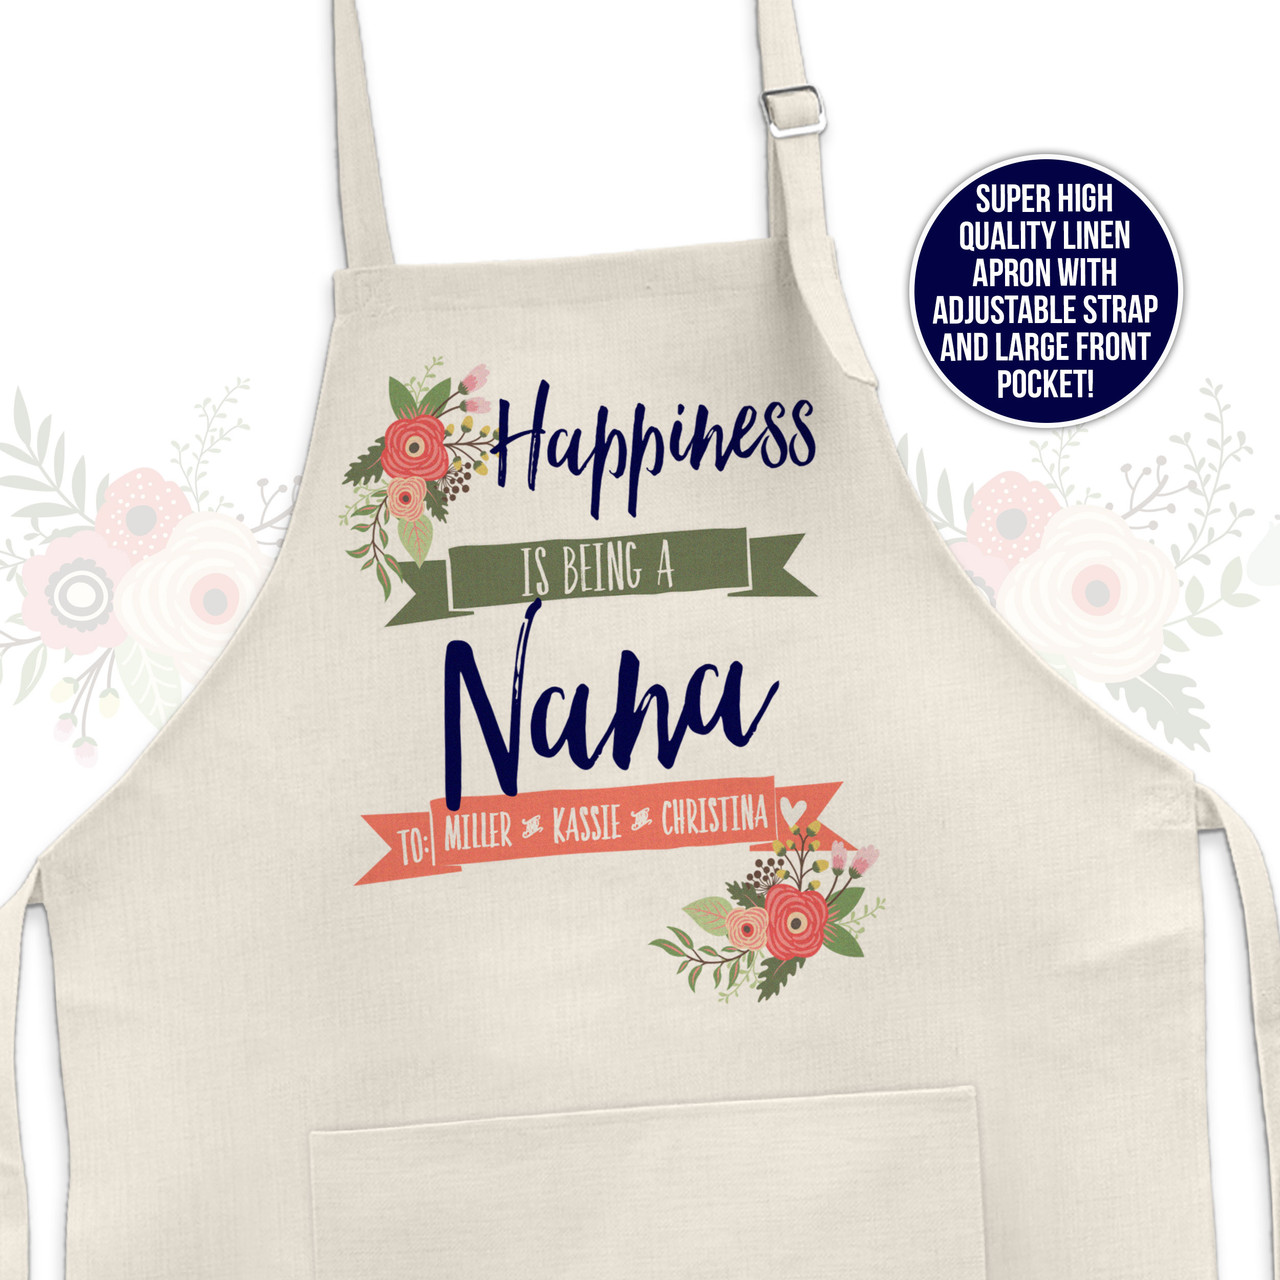 https://cdn11.bigcommerce.com/s-6a772/images/stencil/1280x1280/products/4731/82920/apron-002-3__84648.1644612531.jpg?c=2?imbypass=on